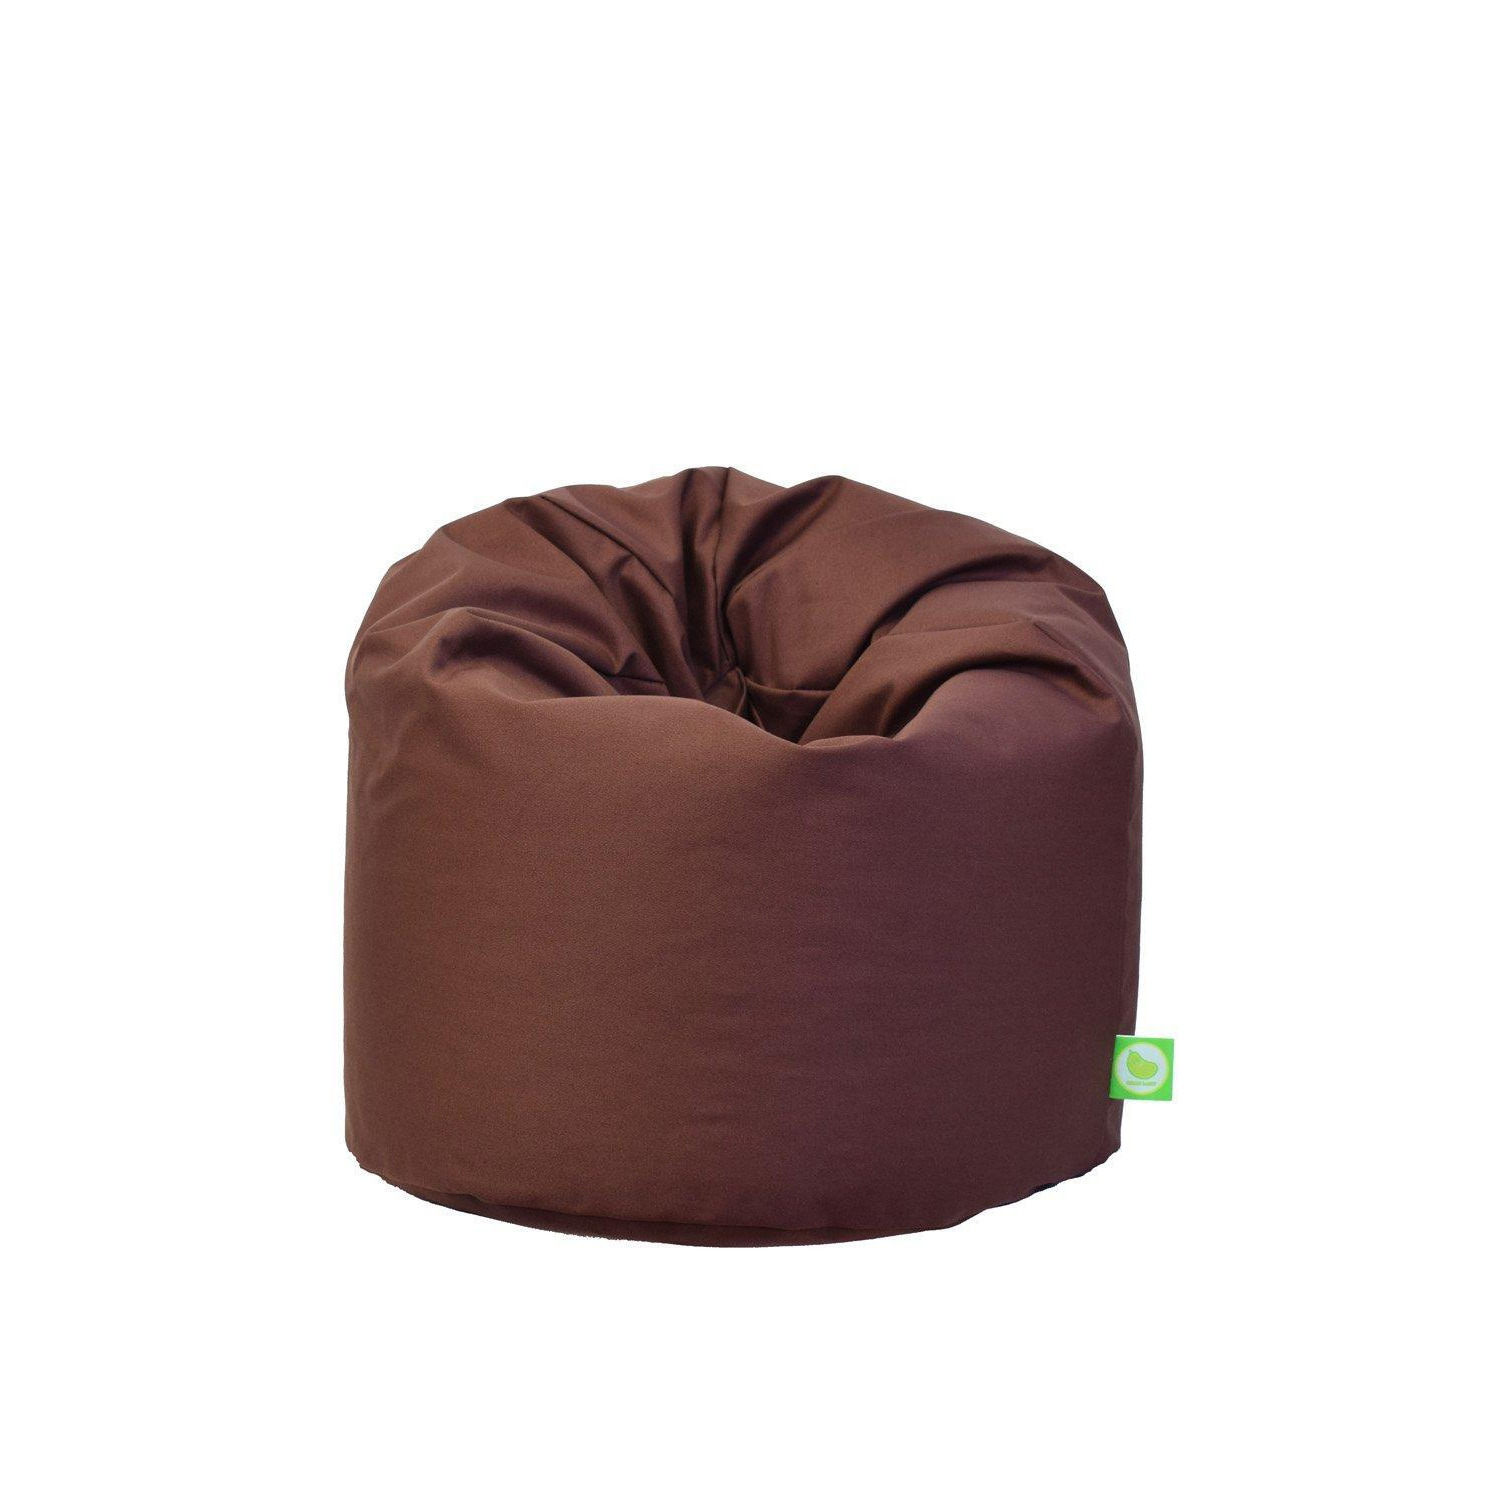 Cotton Twill Chocolate Brown Bean Bag Large Size - image 1